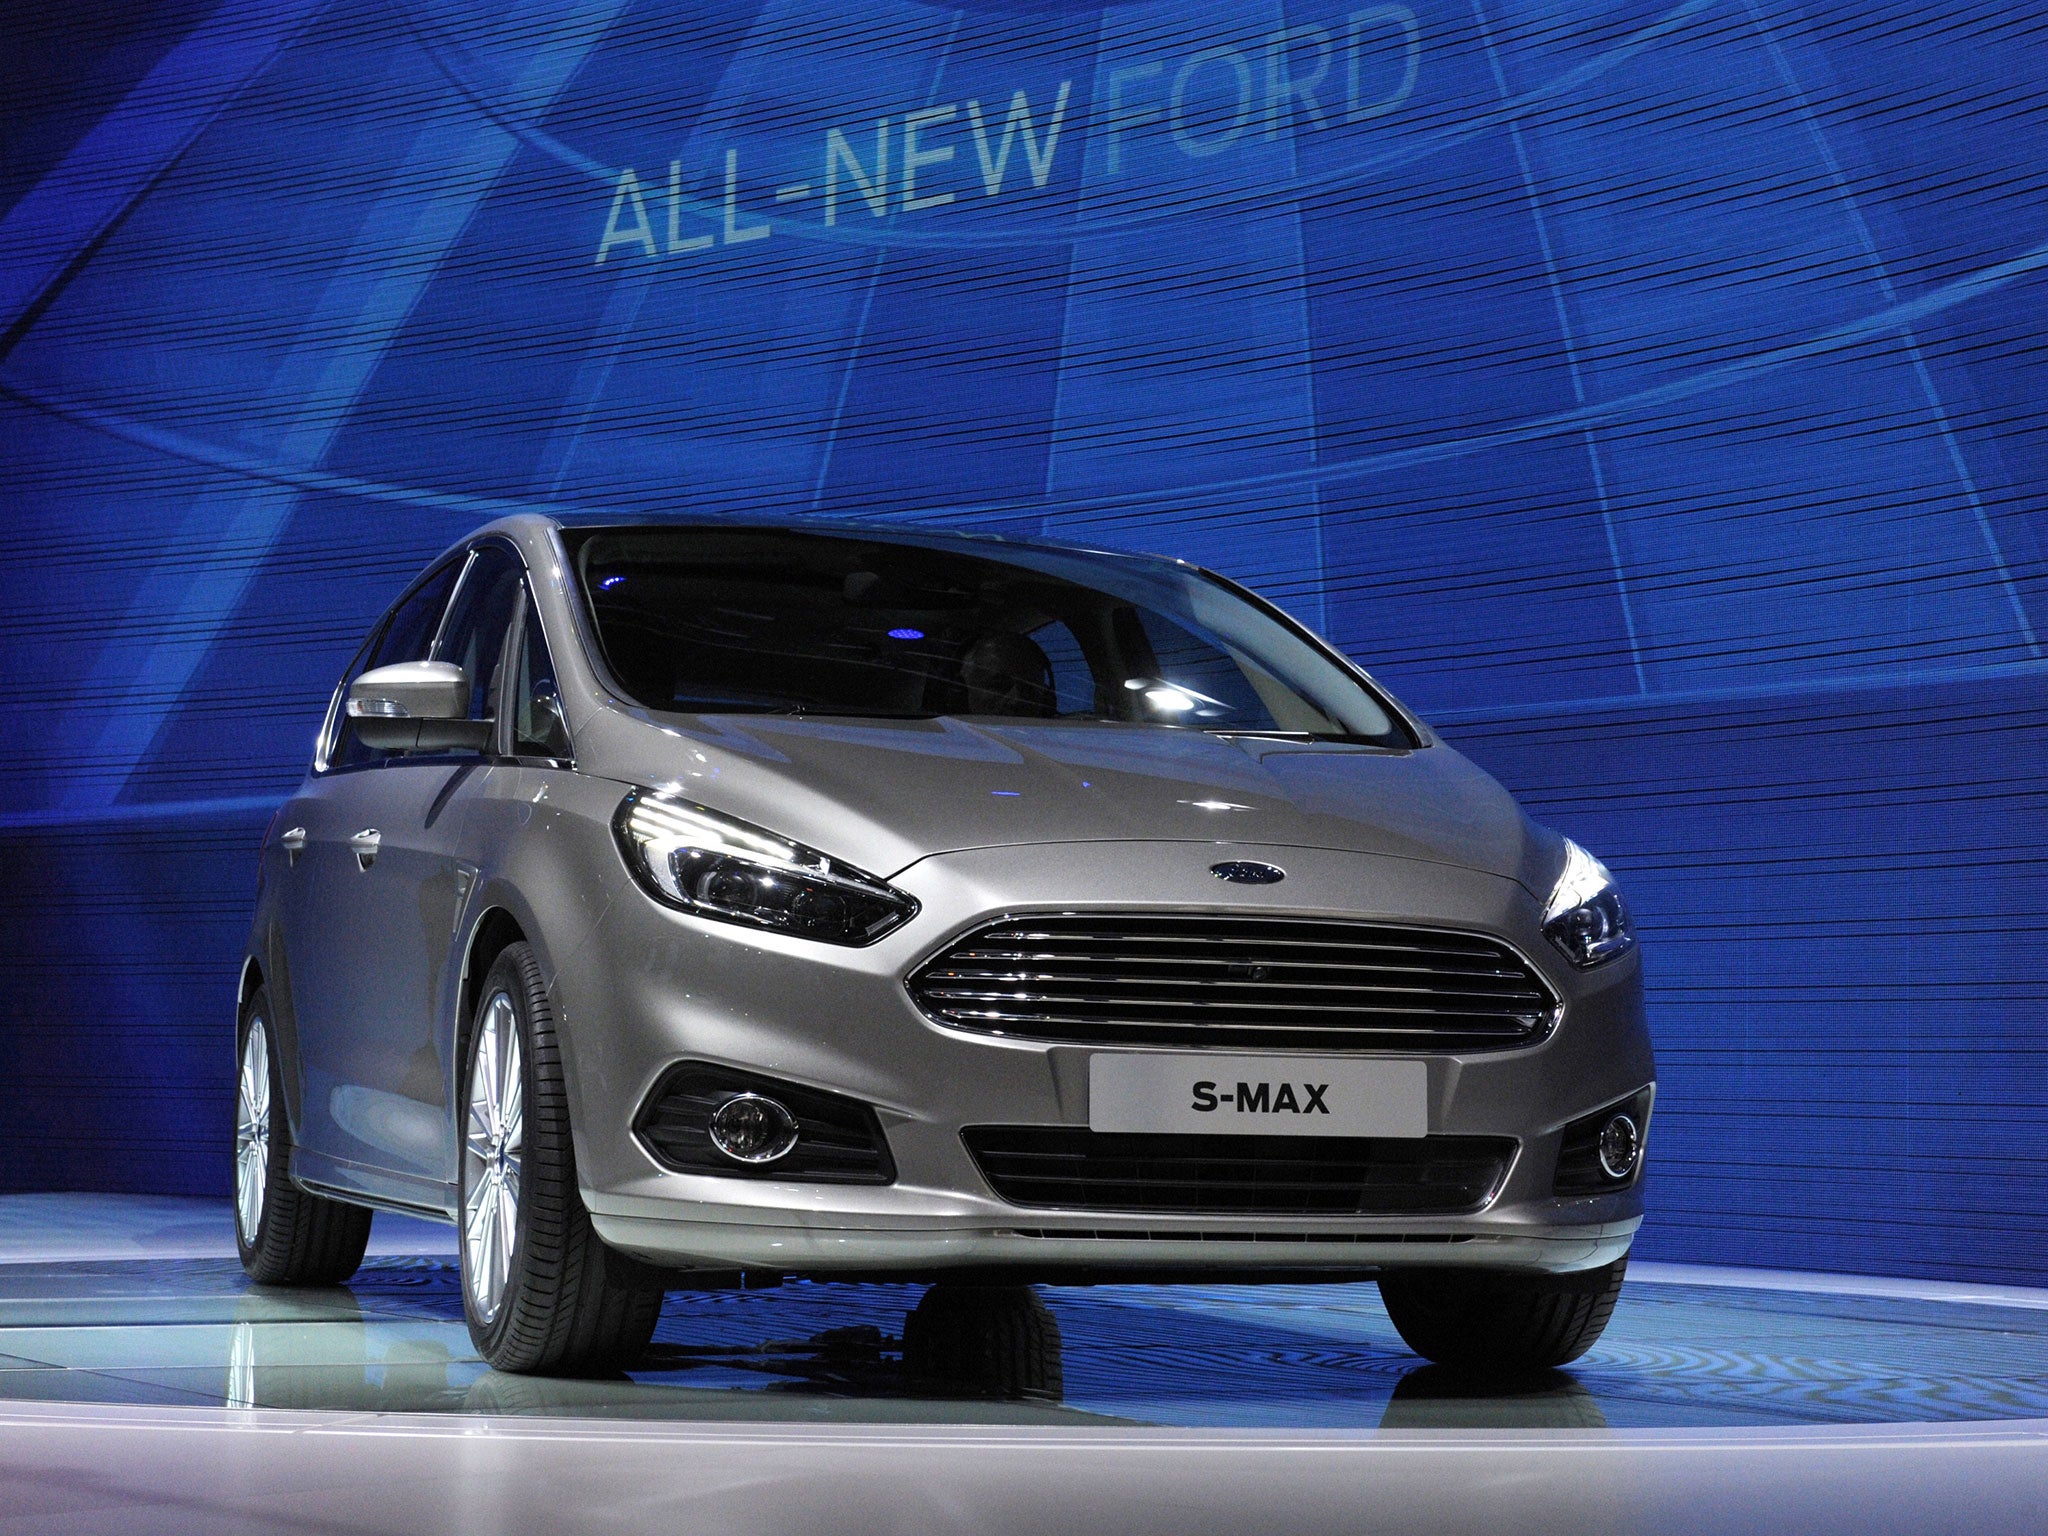 The Ford S Max car is presented